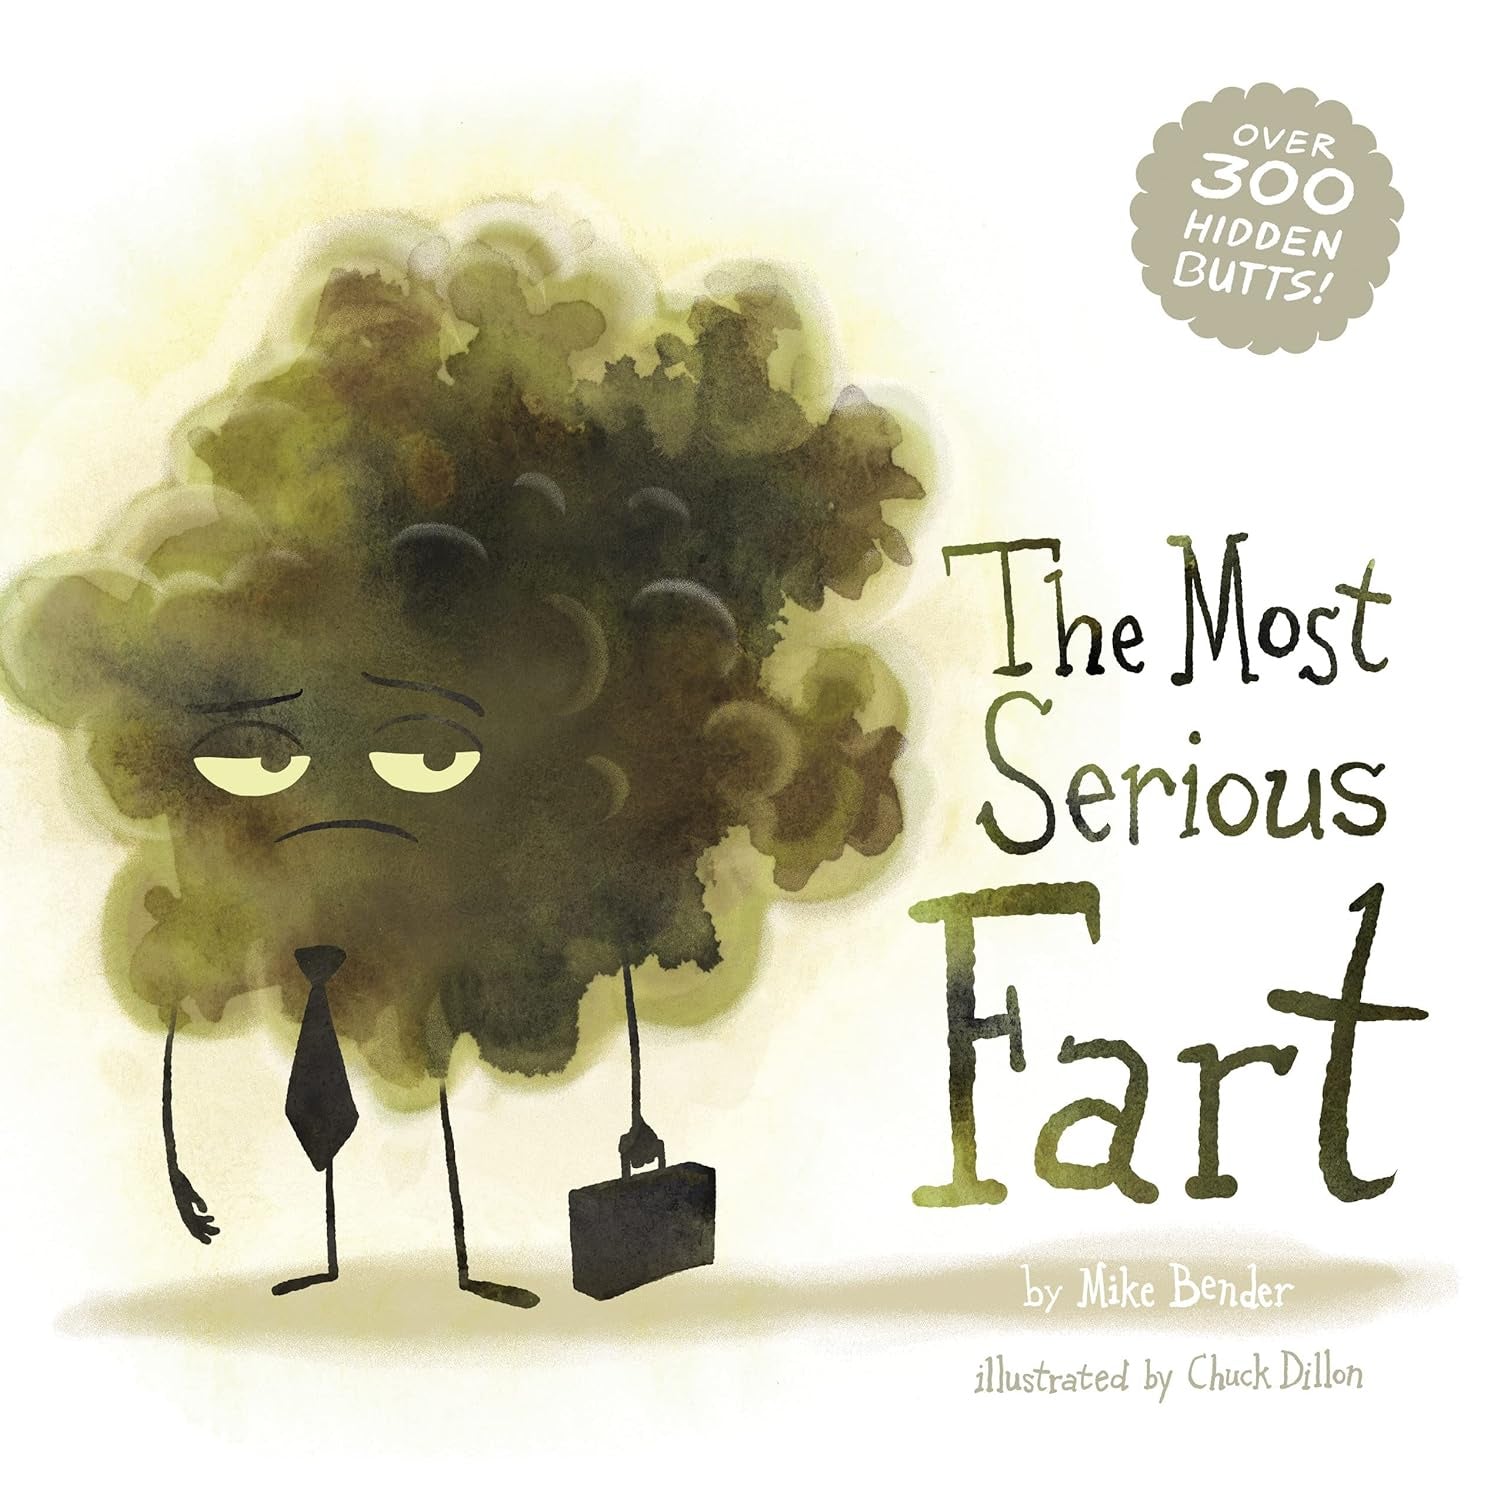 The Most Serious Fart